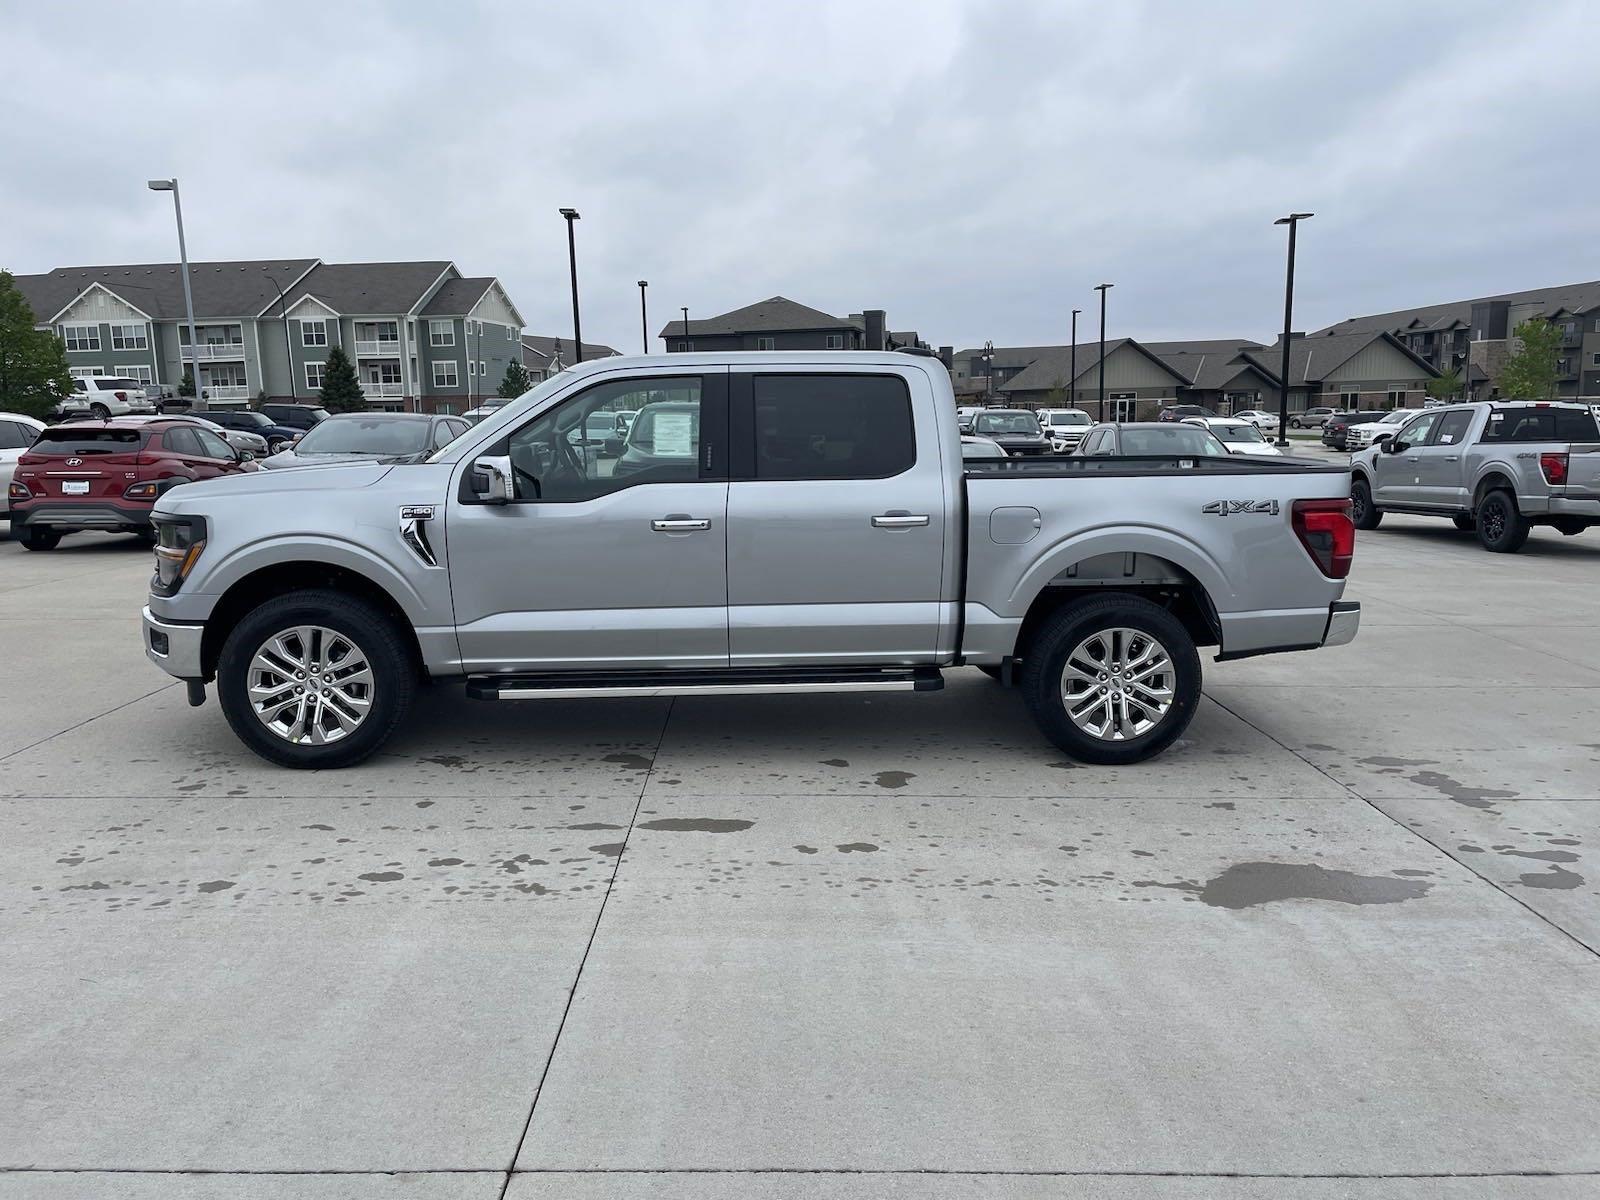 New 2024 Ford F-150 XLT Crew Cab Truck for sale in Lincoln NE